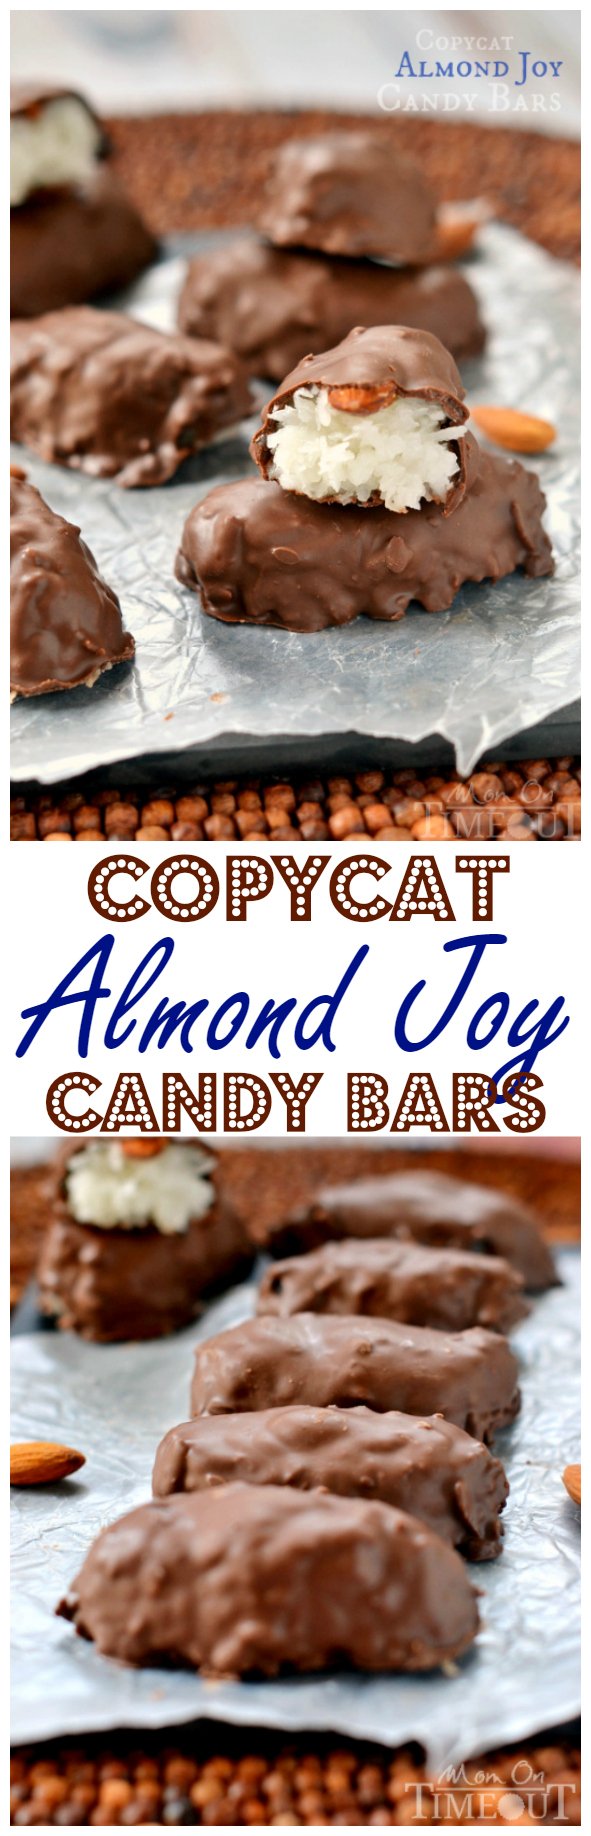 Easily make your own Almond Joy Candy Bars at home! | MomOnTimeout.com | #copycat #candy #recipe #chocolate